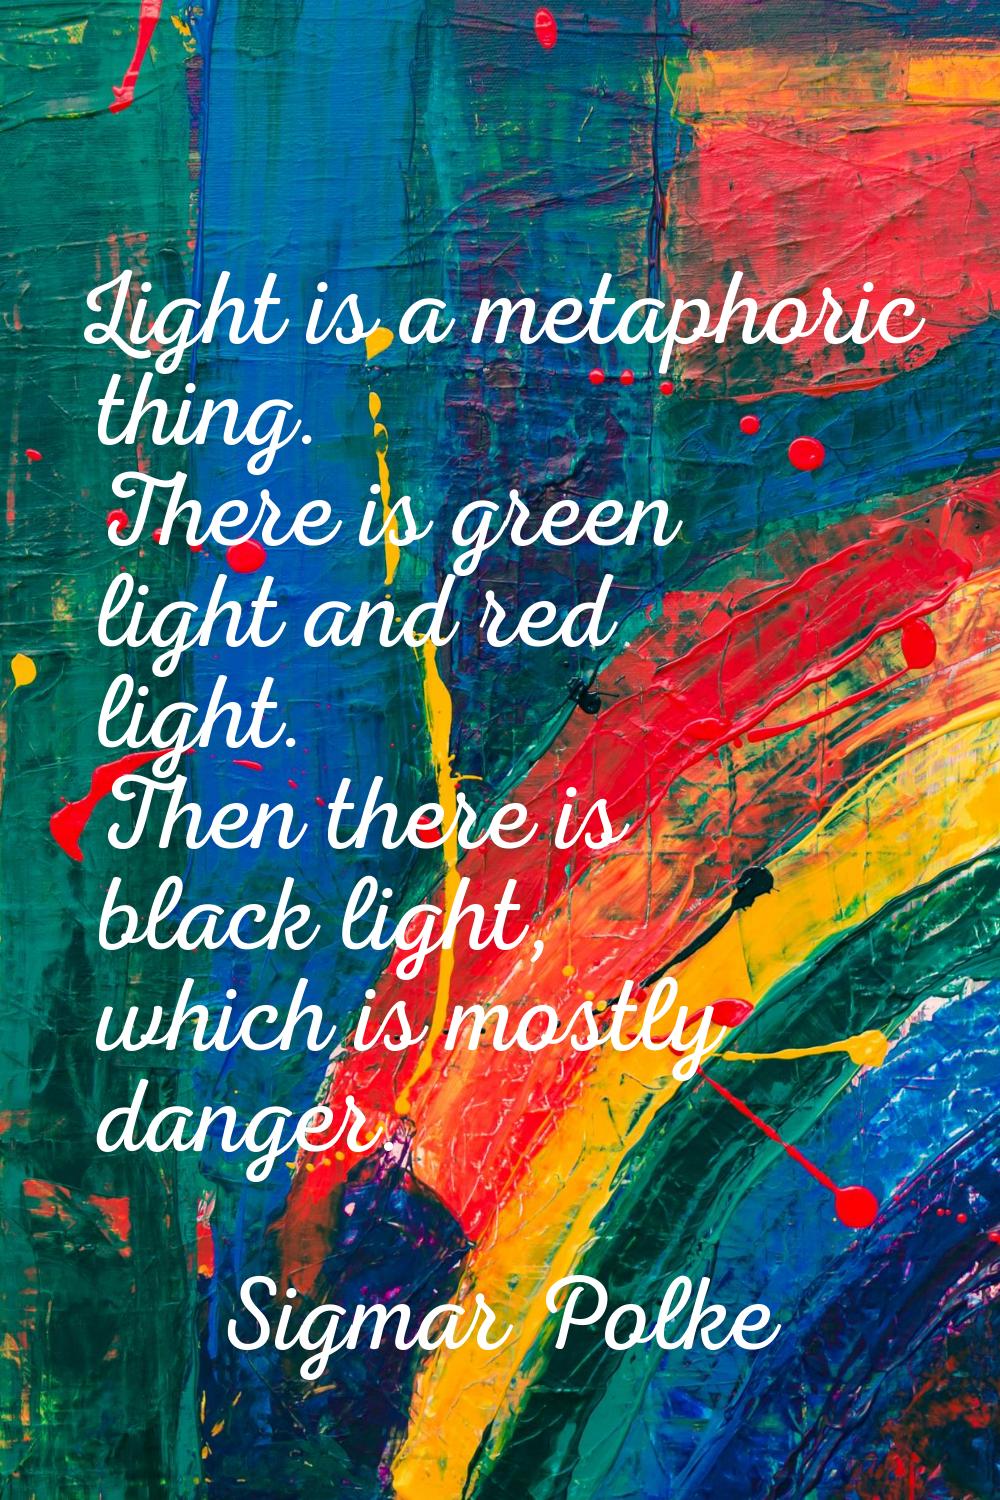 Light is a metaphoric thing. There is green light and red light. Then there is black light, which i